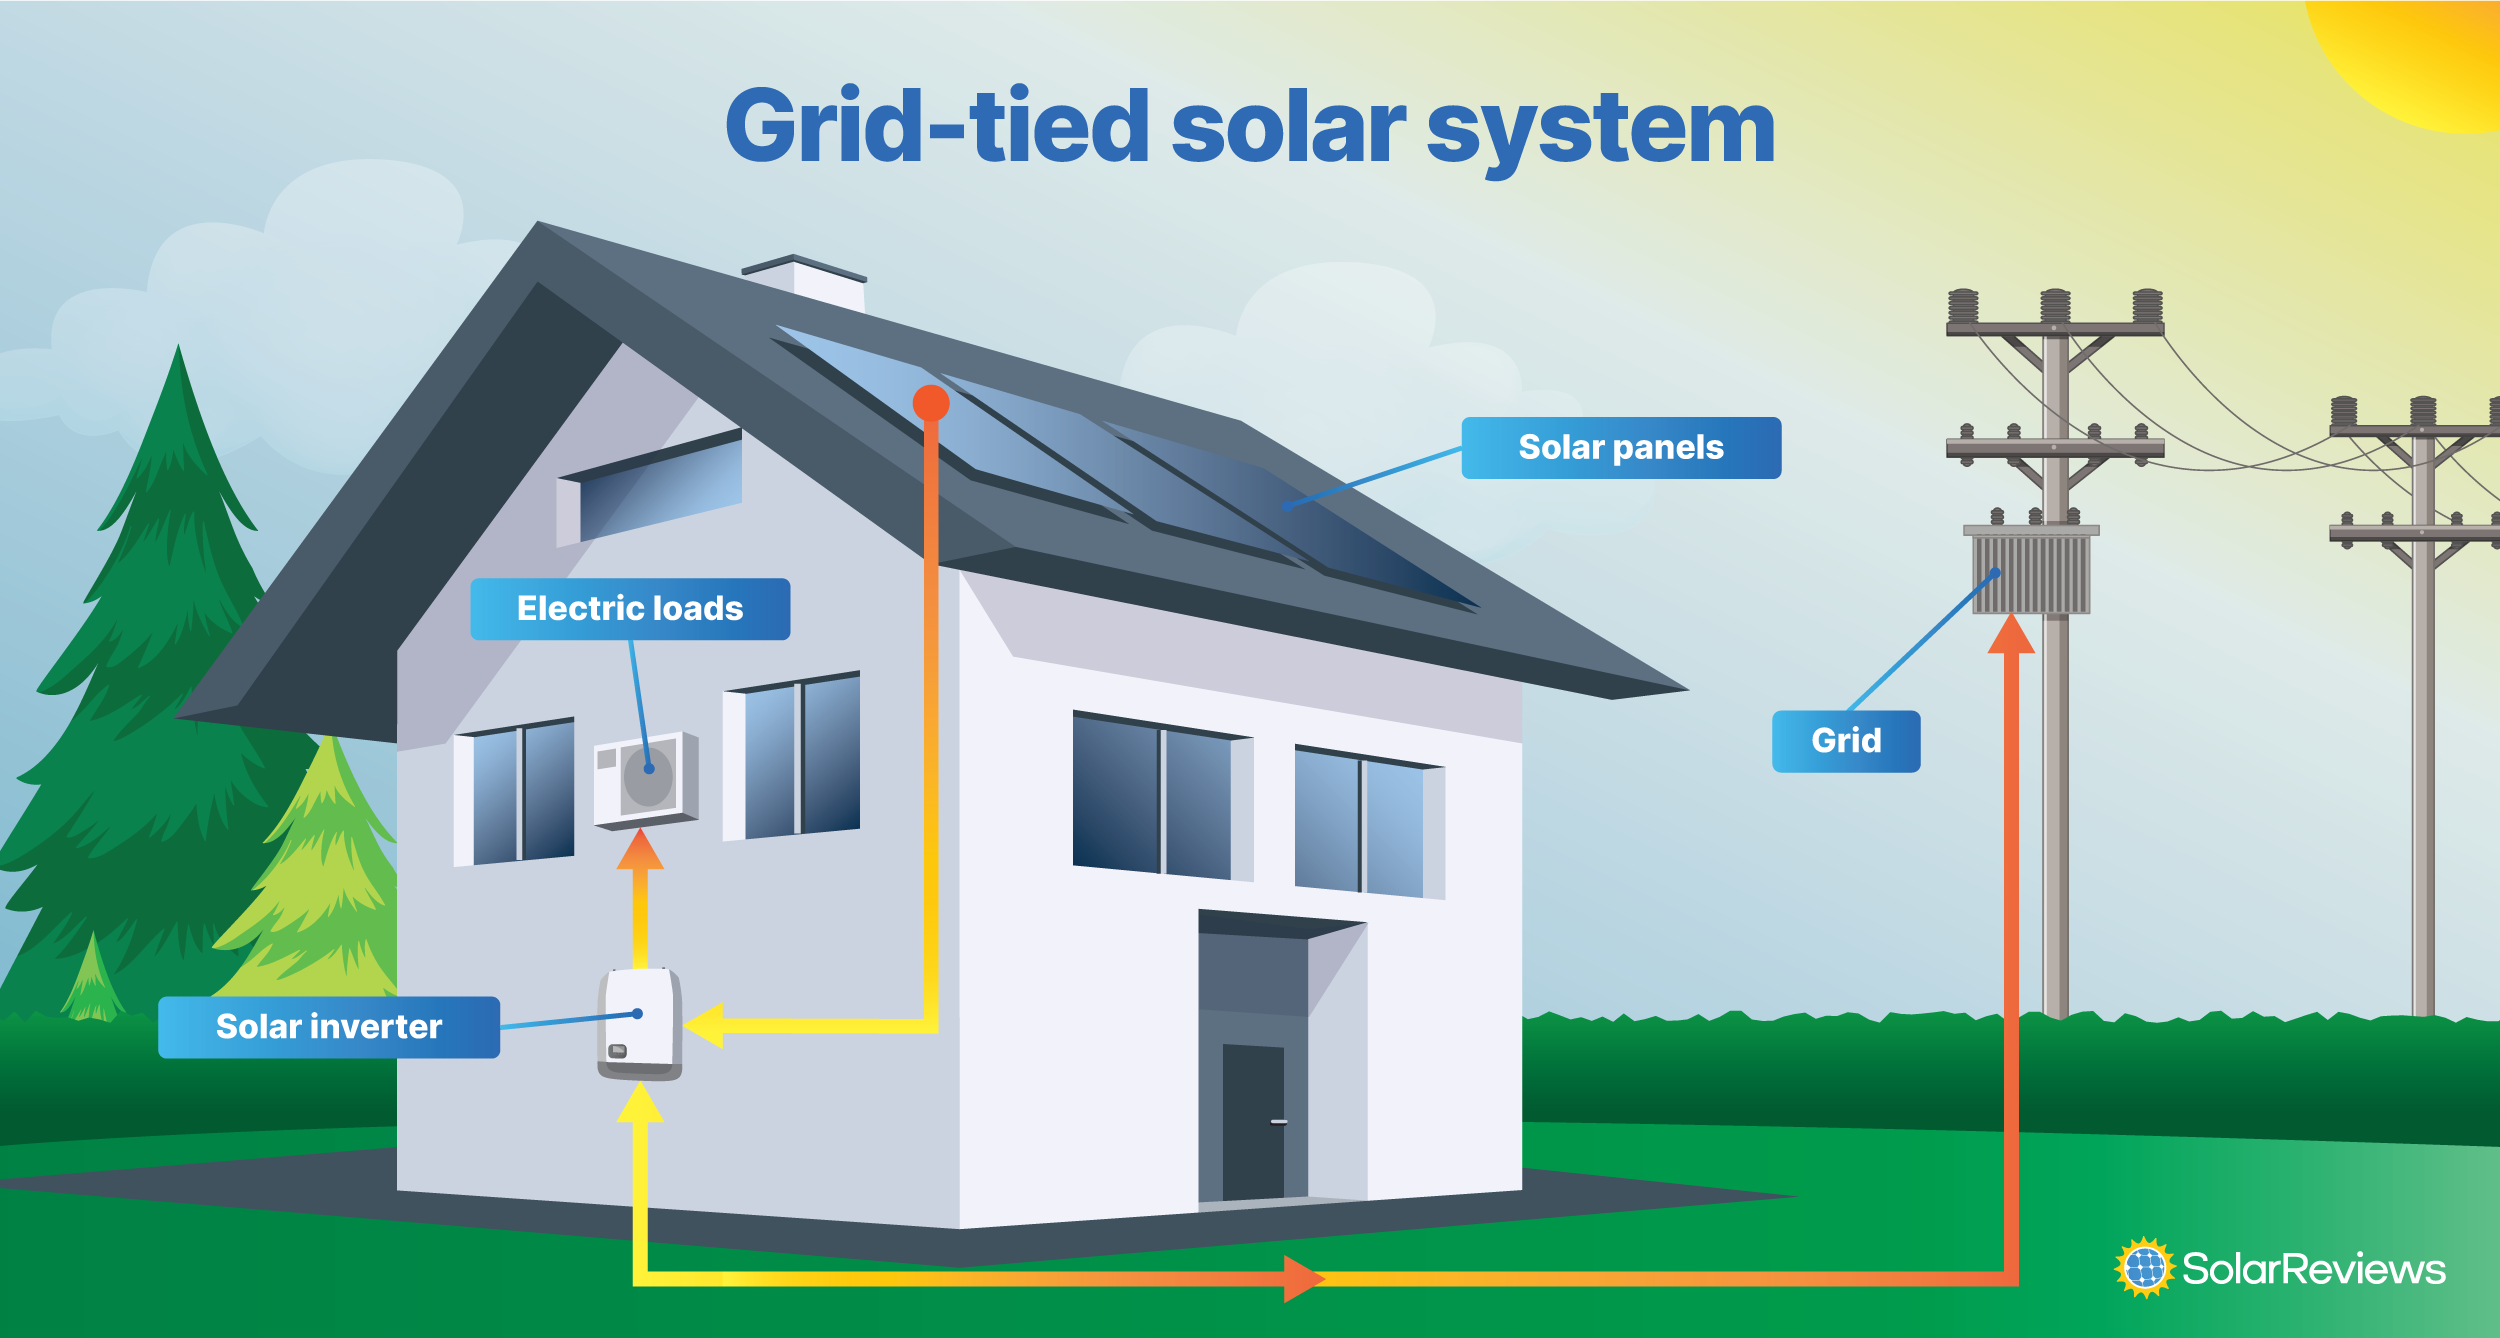 A home with a grid-tied solar system. Electricity flows from solar panels to the solar inverter to power electrical loads. The home's appliances can also take power from the grid when the panels don't produce enough energy, or the solar panels can send energy to the grid if they generate too much.